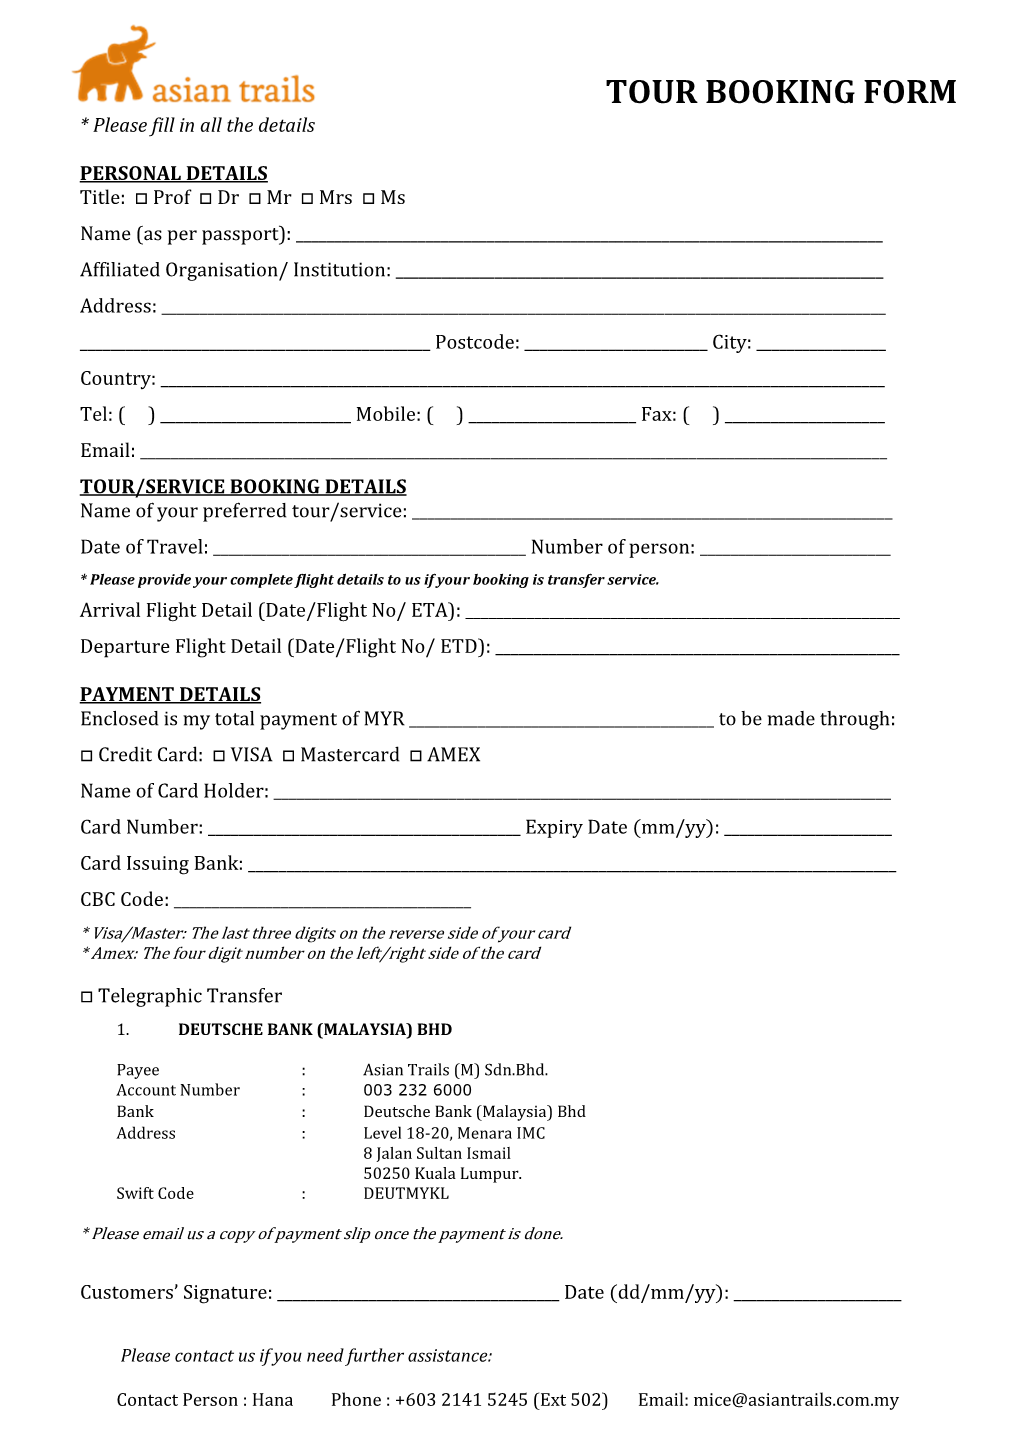 TOUR BOOKING FORM * Please Fill in All the Details